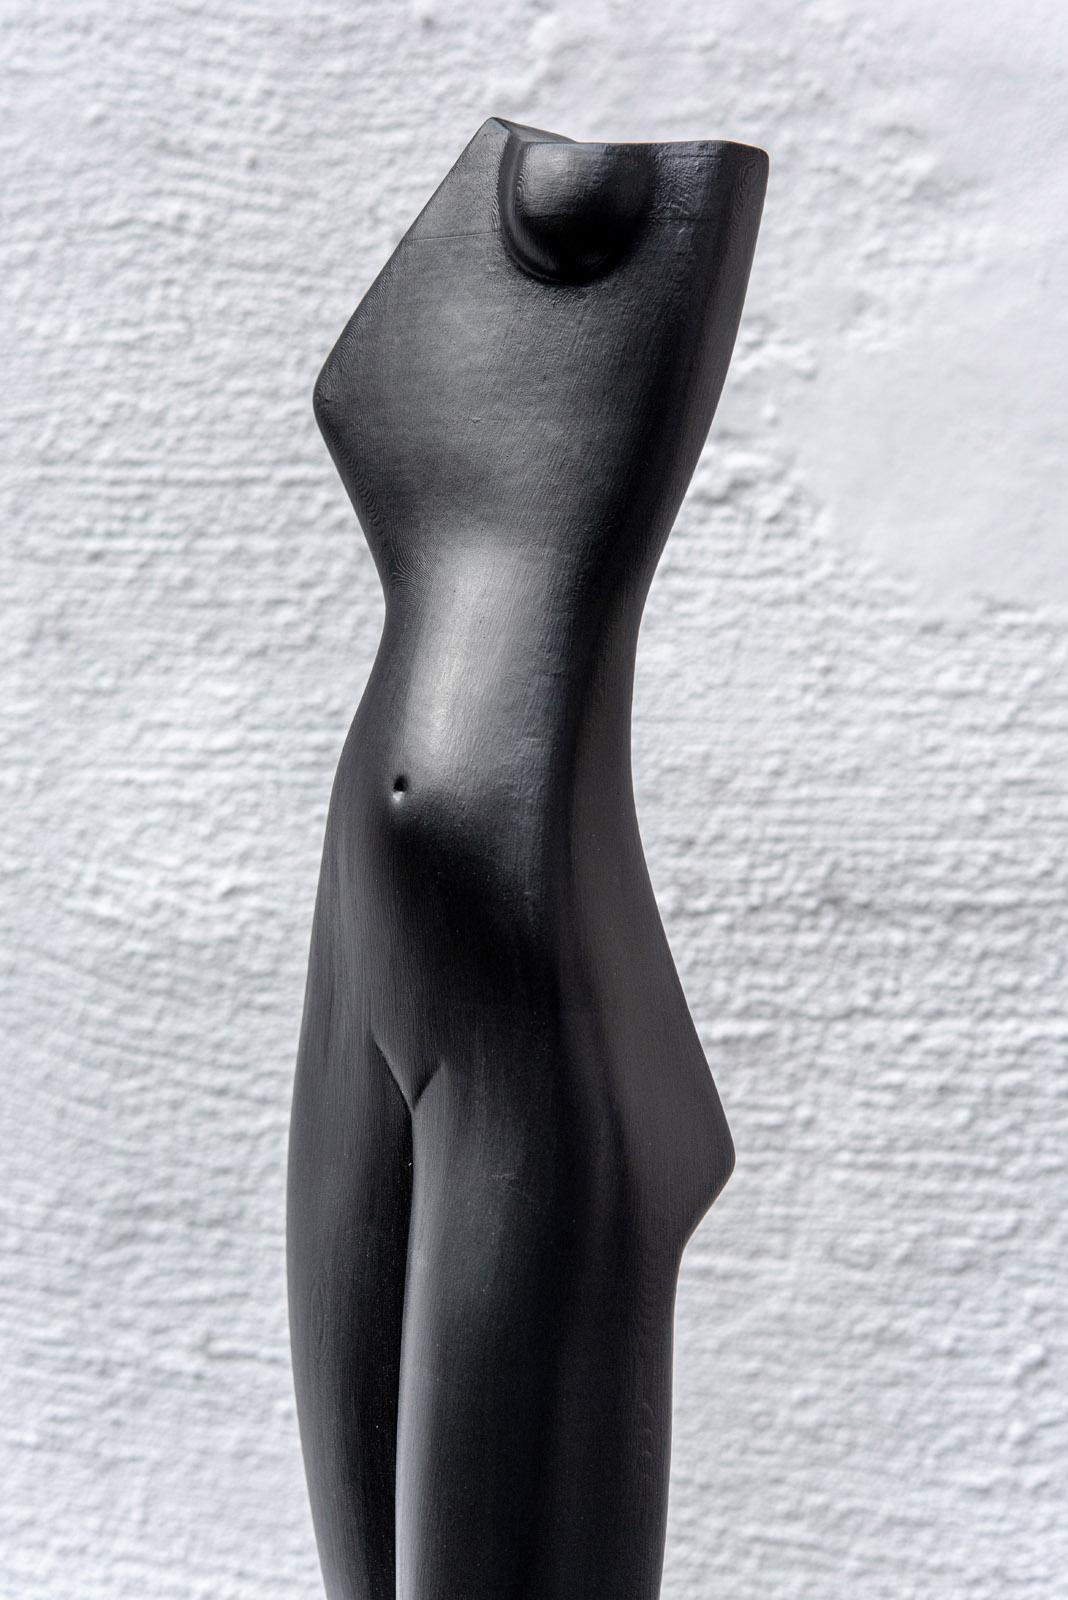 Elegance - Contemporary Sculpture by Larry Scaturro